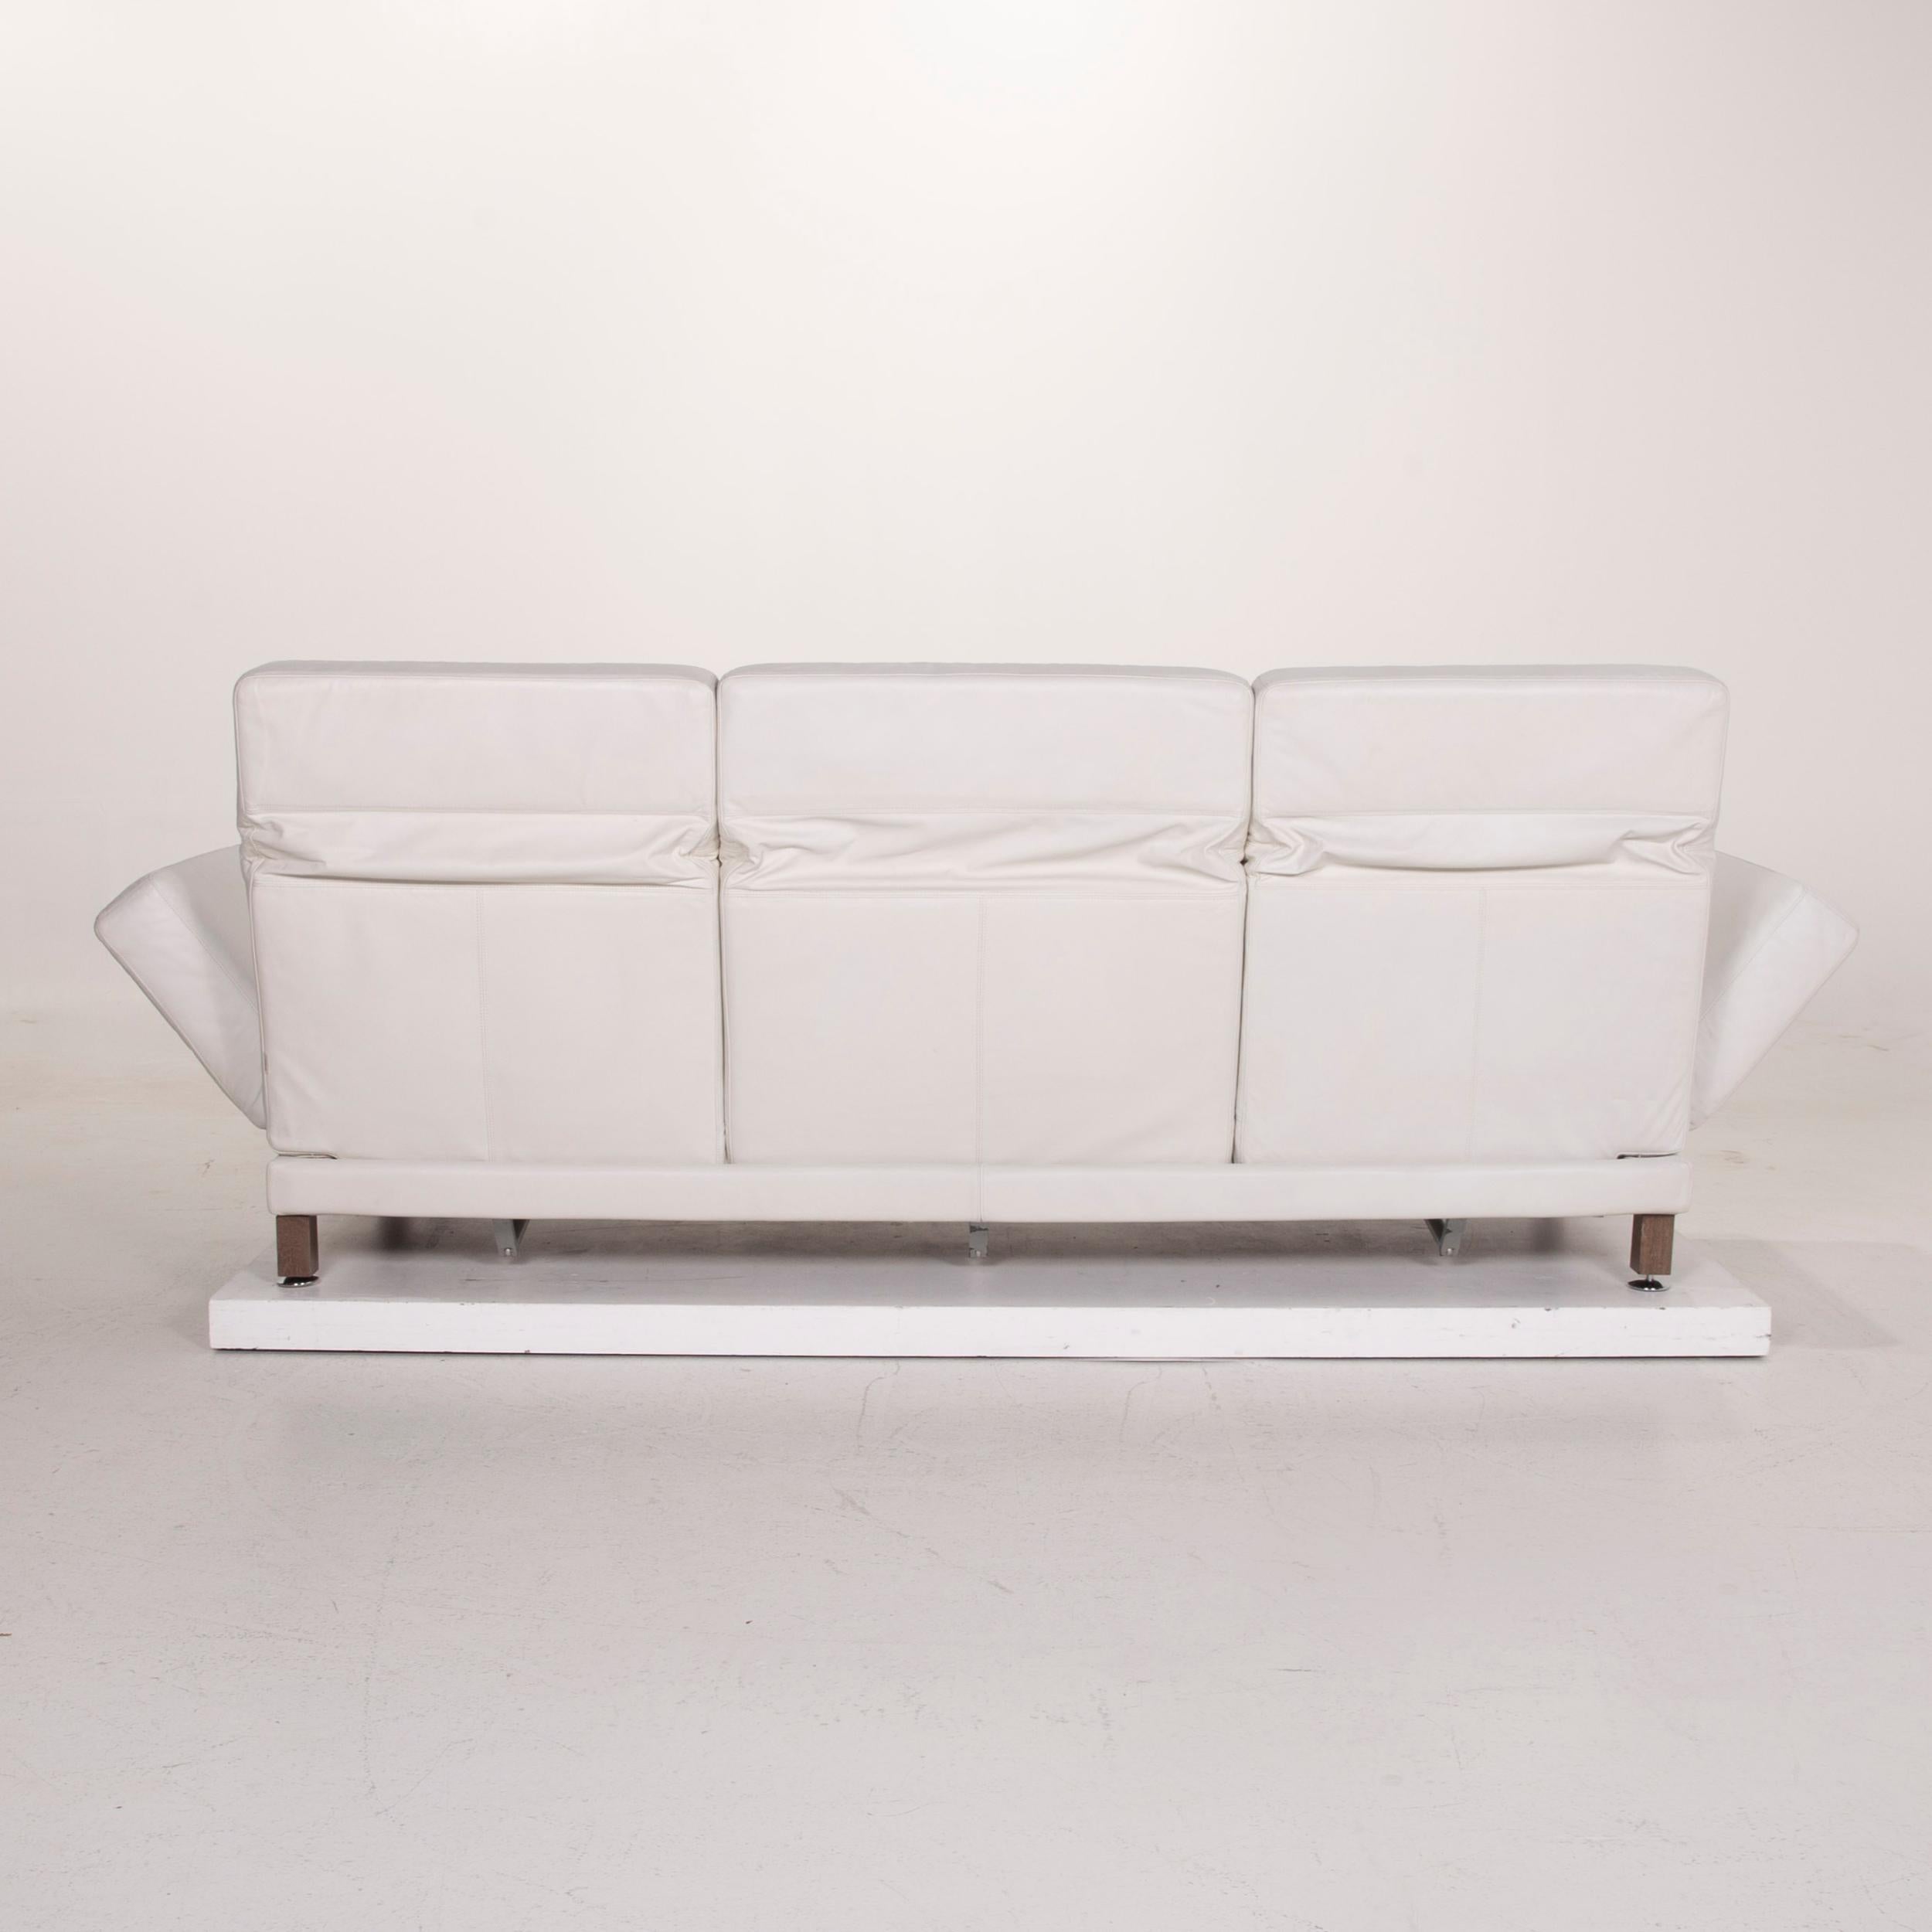 Brühl & Sippold Moule Leather Sofa White Three-Seat Relaxation Function For Sale 6